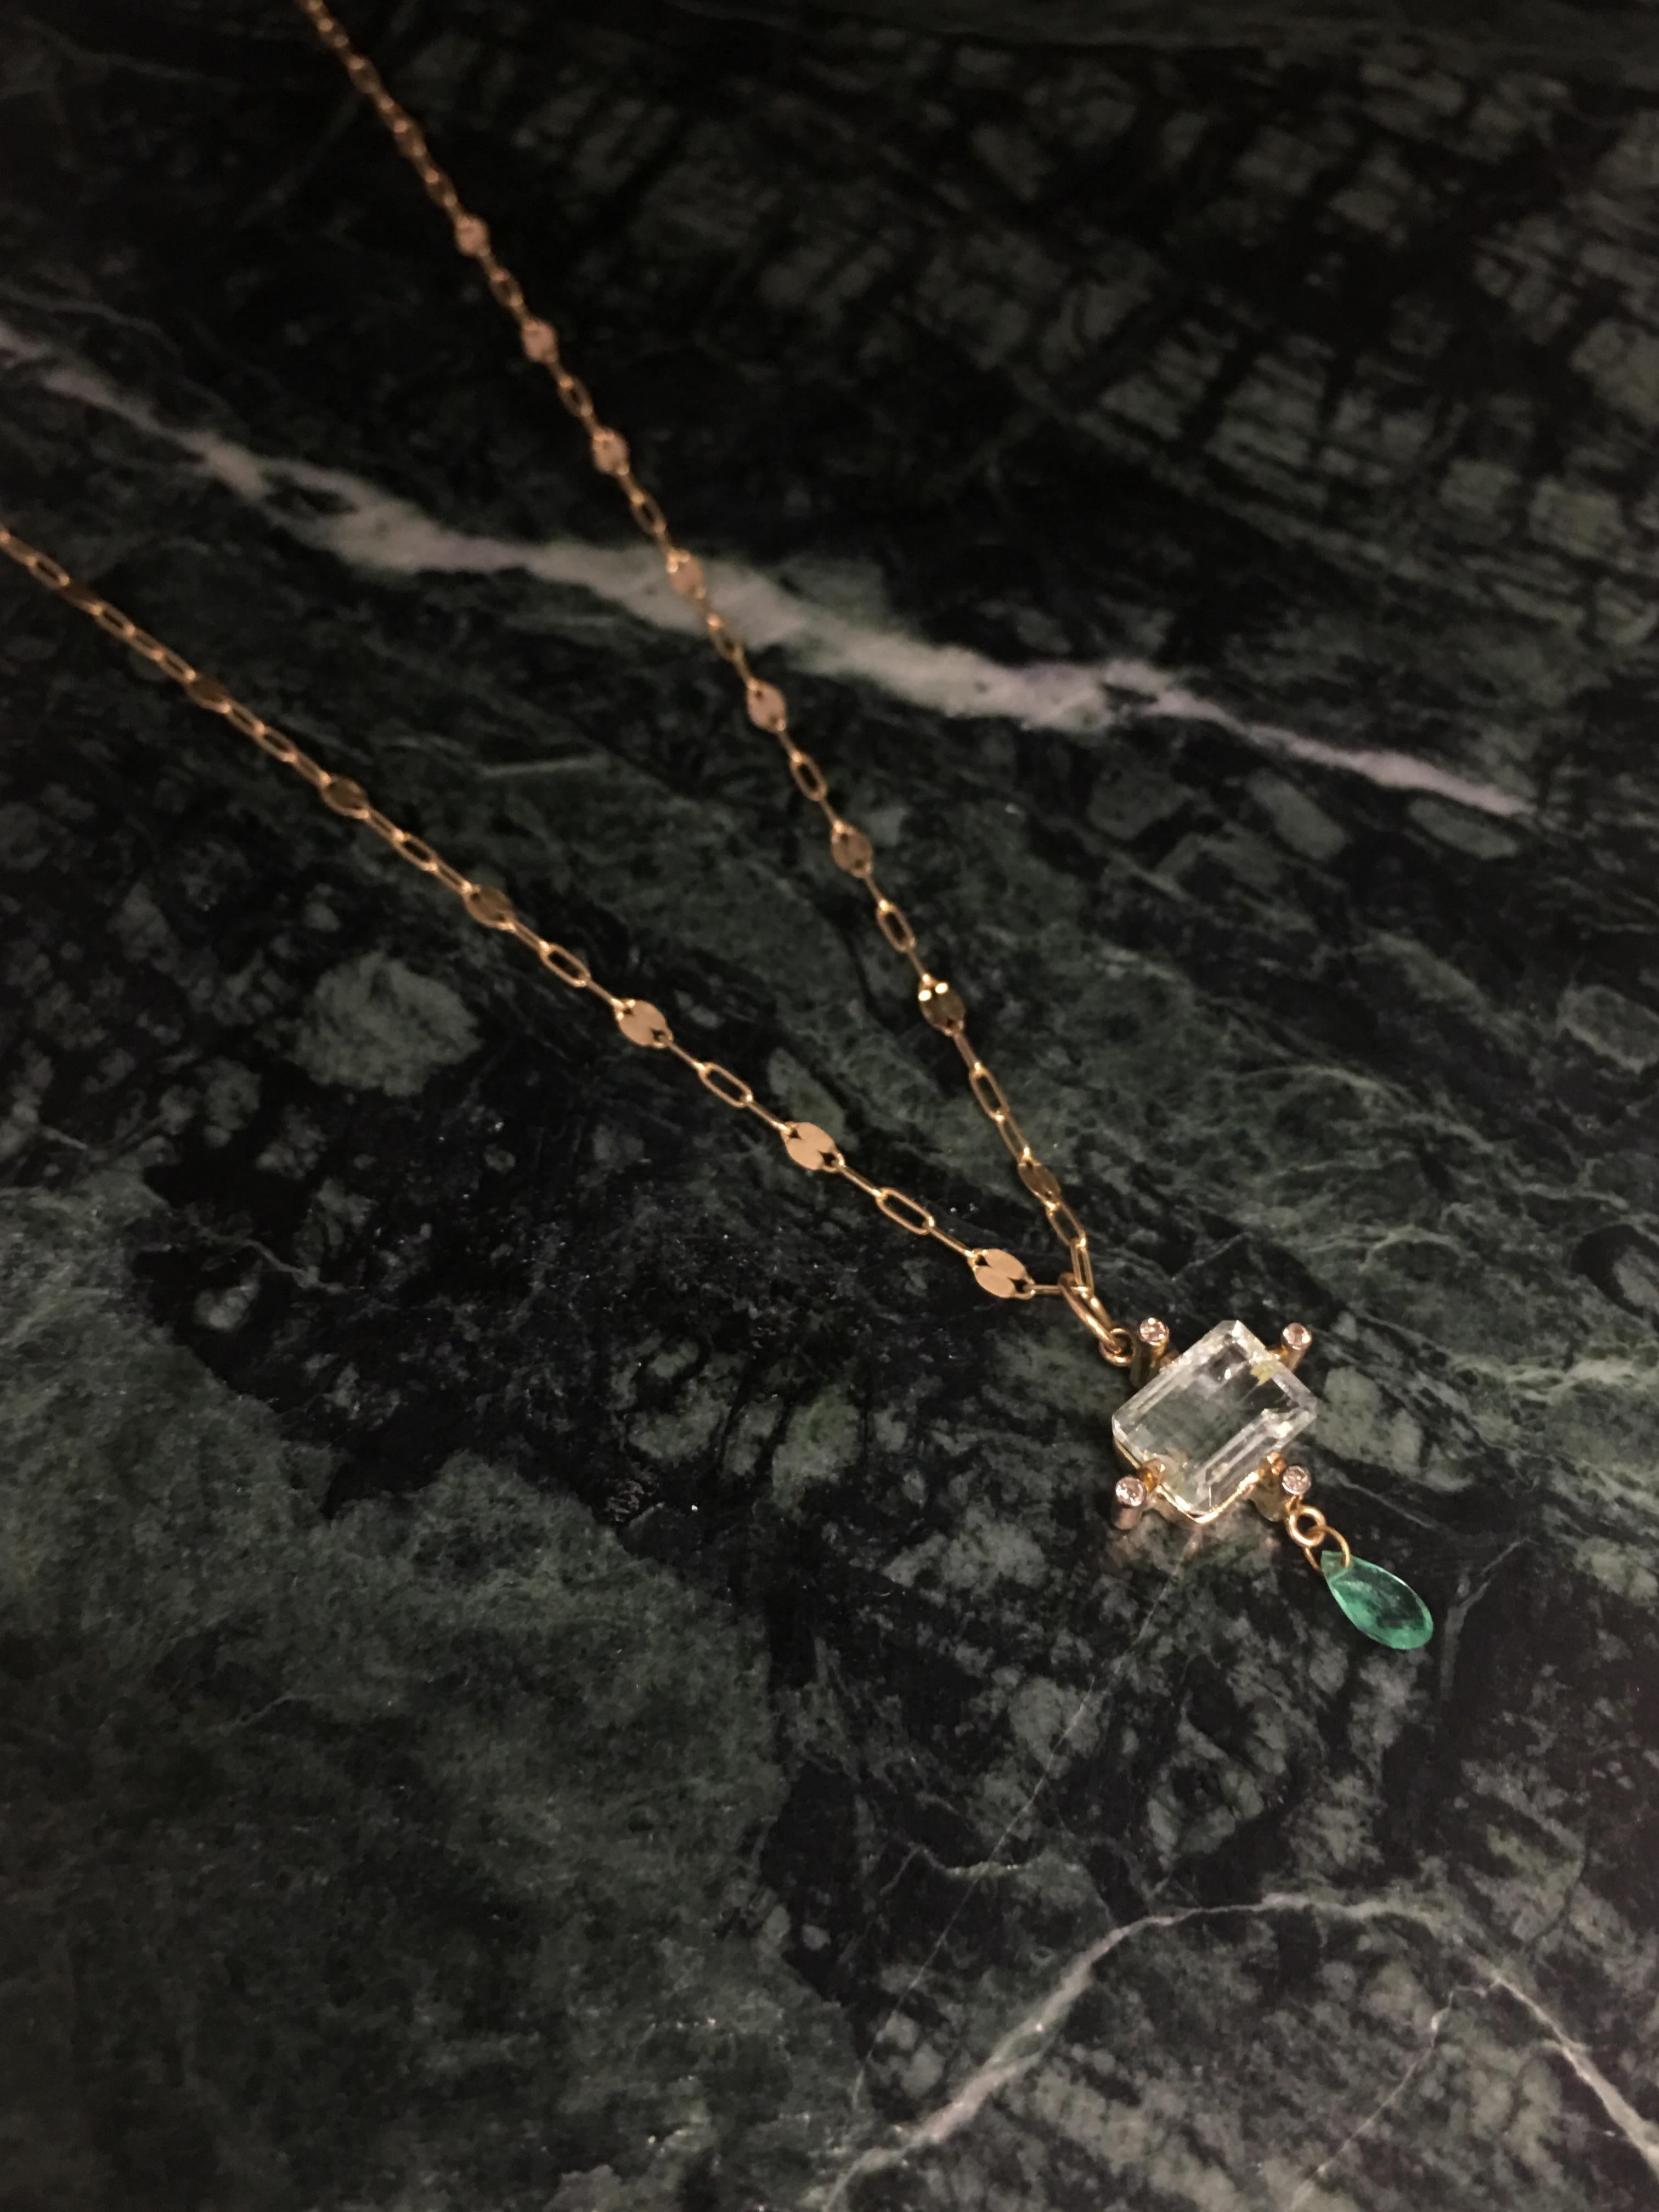 One of a kind pendant and chain designed by 5 OCTOBRE 
1,33 karats aquamarine, 0,42 karats emerald and 0,25 karats diamonds setted on 14K chain